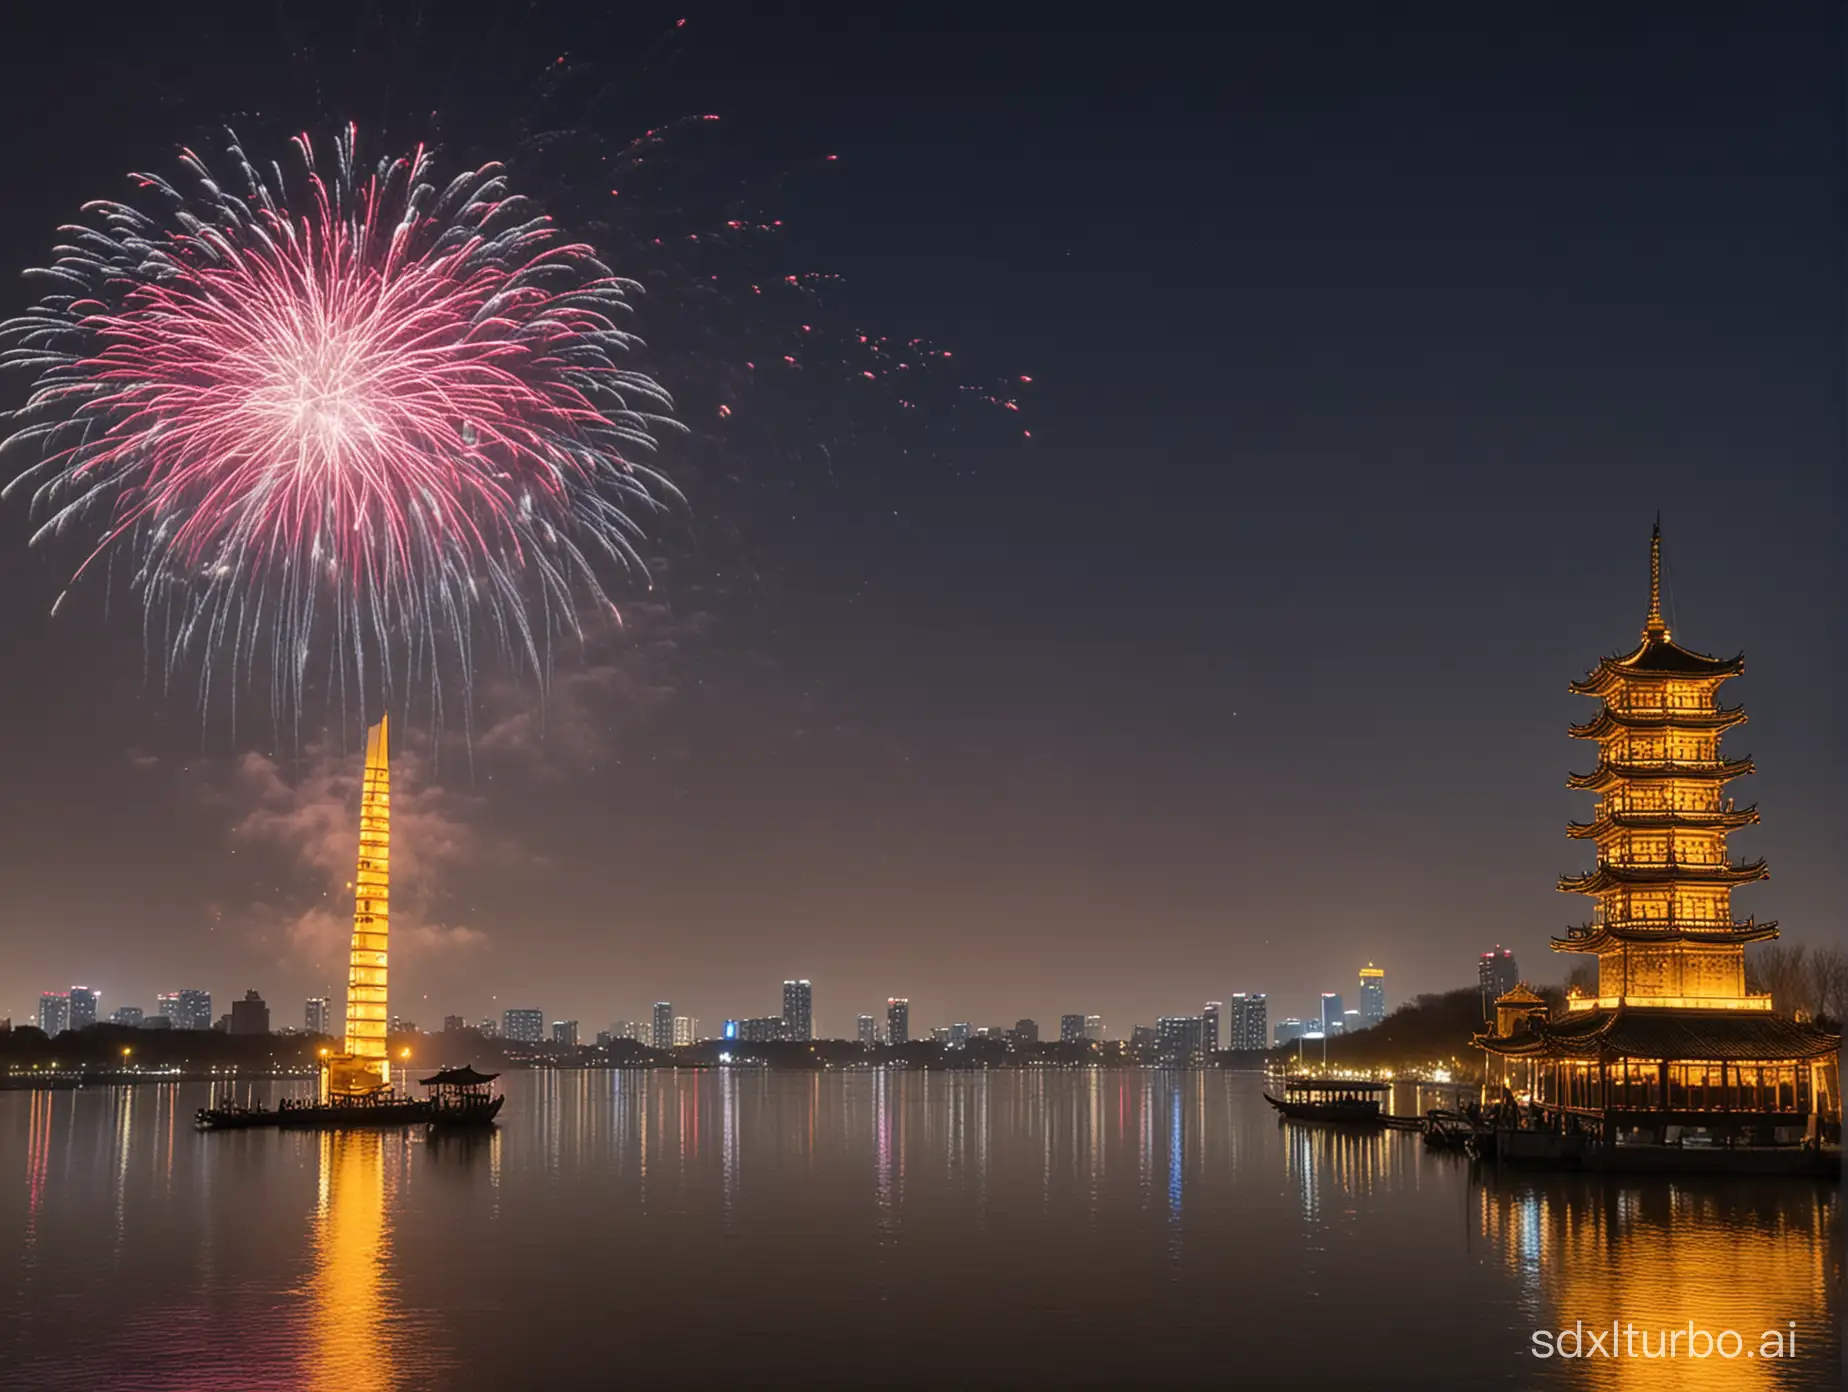 Farewell-to-Yellow-Crane-Tower-Lone-Sail-and-March-Fireworks-Over-Yangzhou